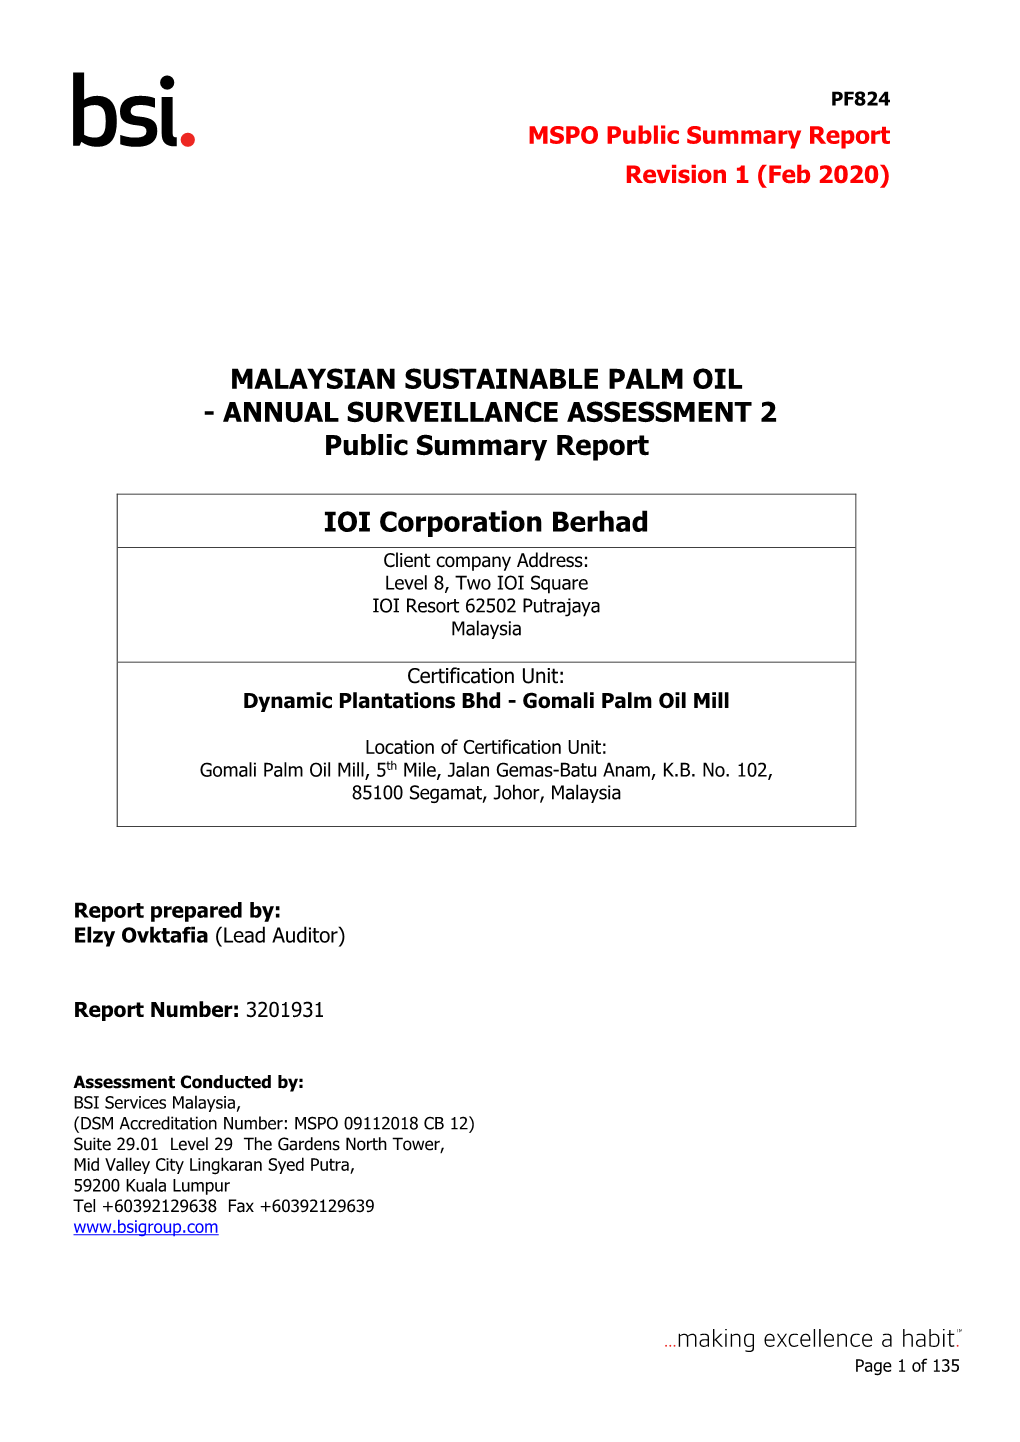 MALAYSIAN SUSTAINABLE PALM OIL - ANNUAL SURVEILLANCE ASSESSMENT 2 Public Summary Report